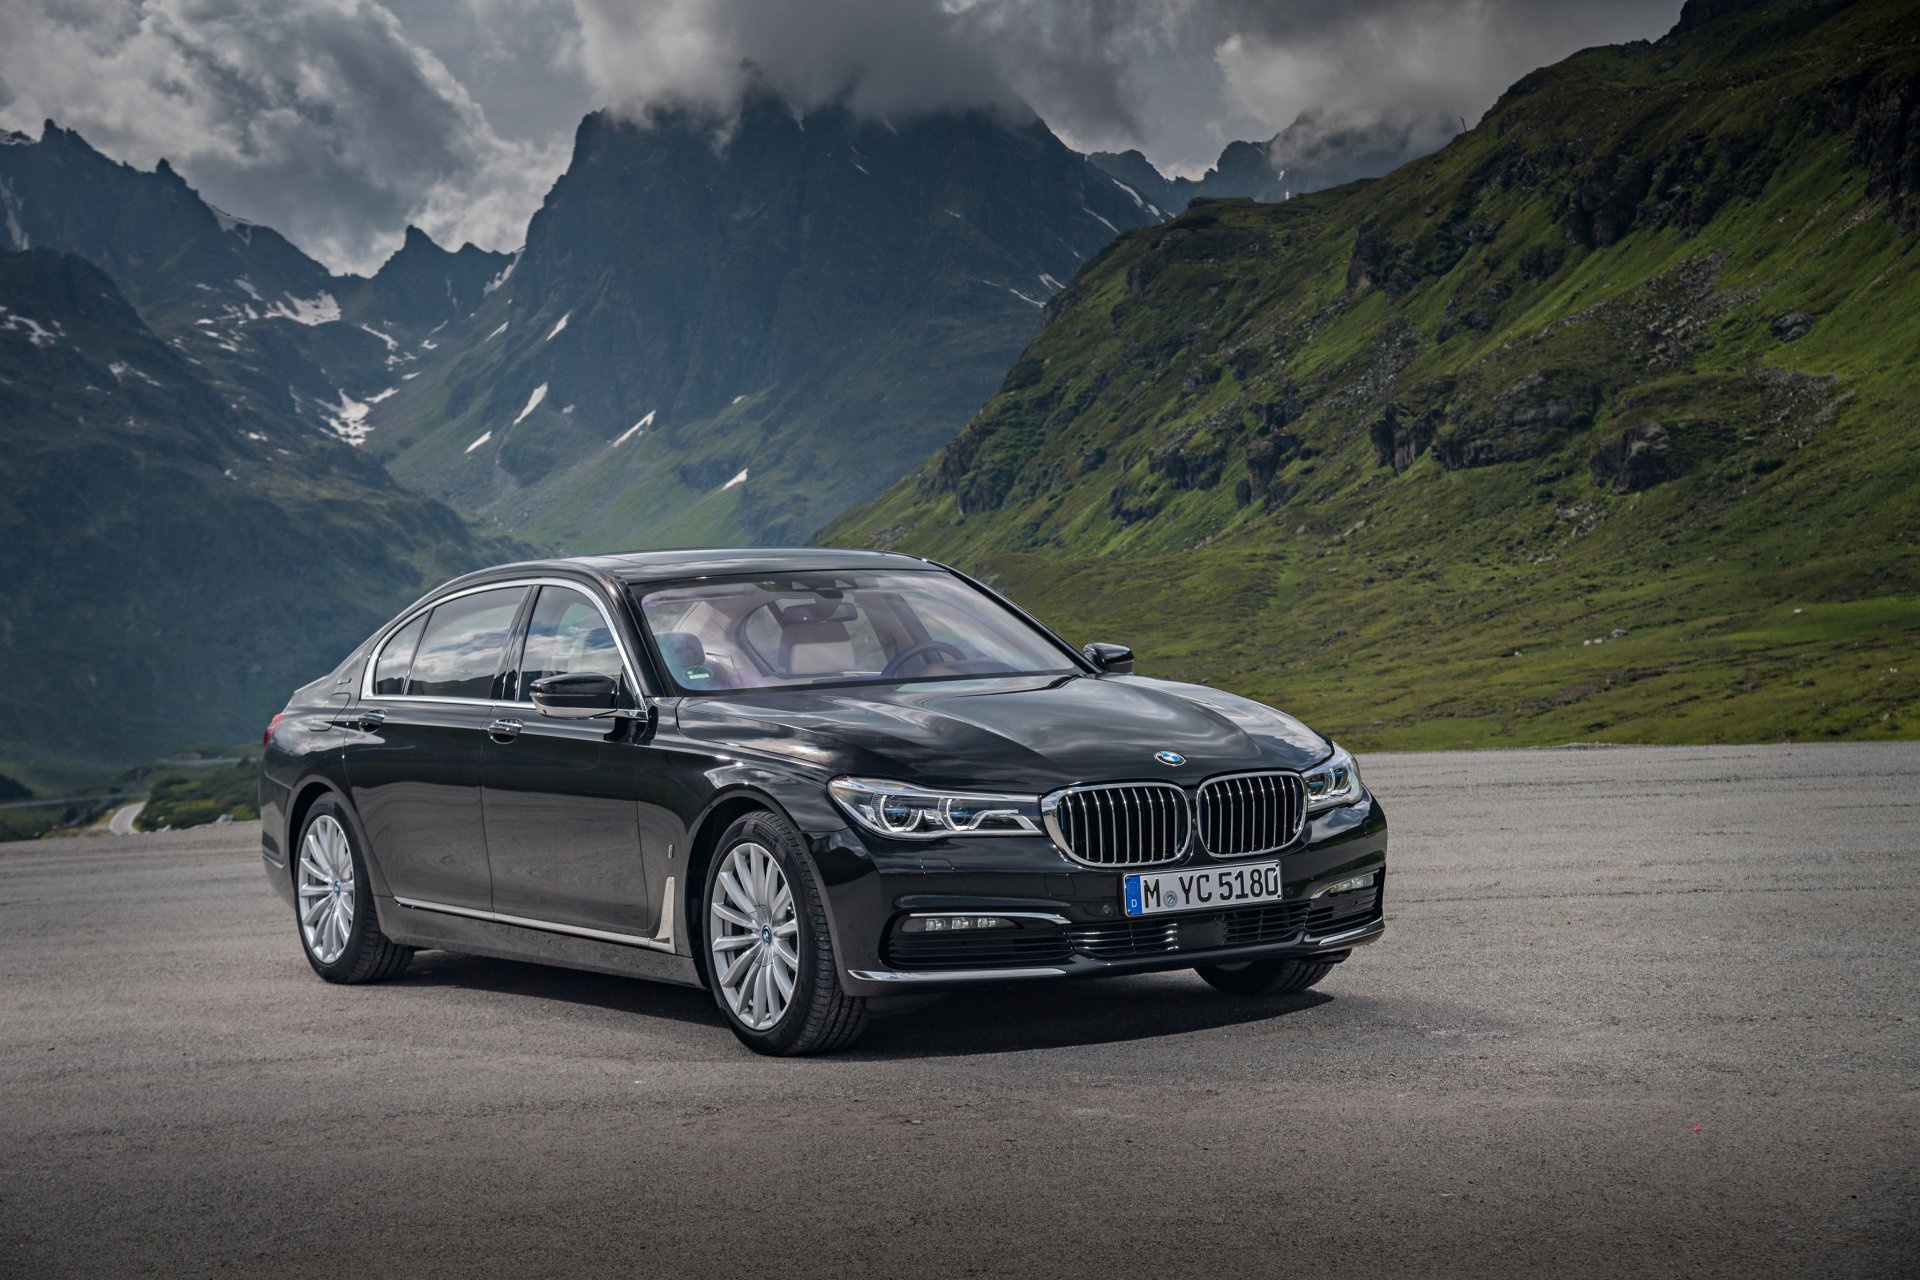 BMW 7 Series, HD wallpapers, Automotive excellence, Luxury at its finest, 1920x1280 HD Desktop